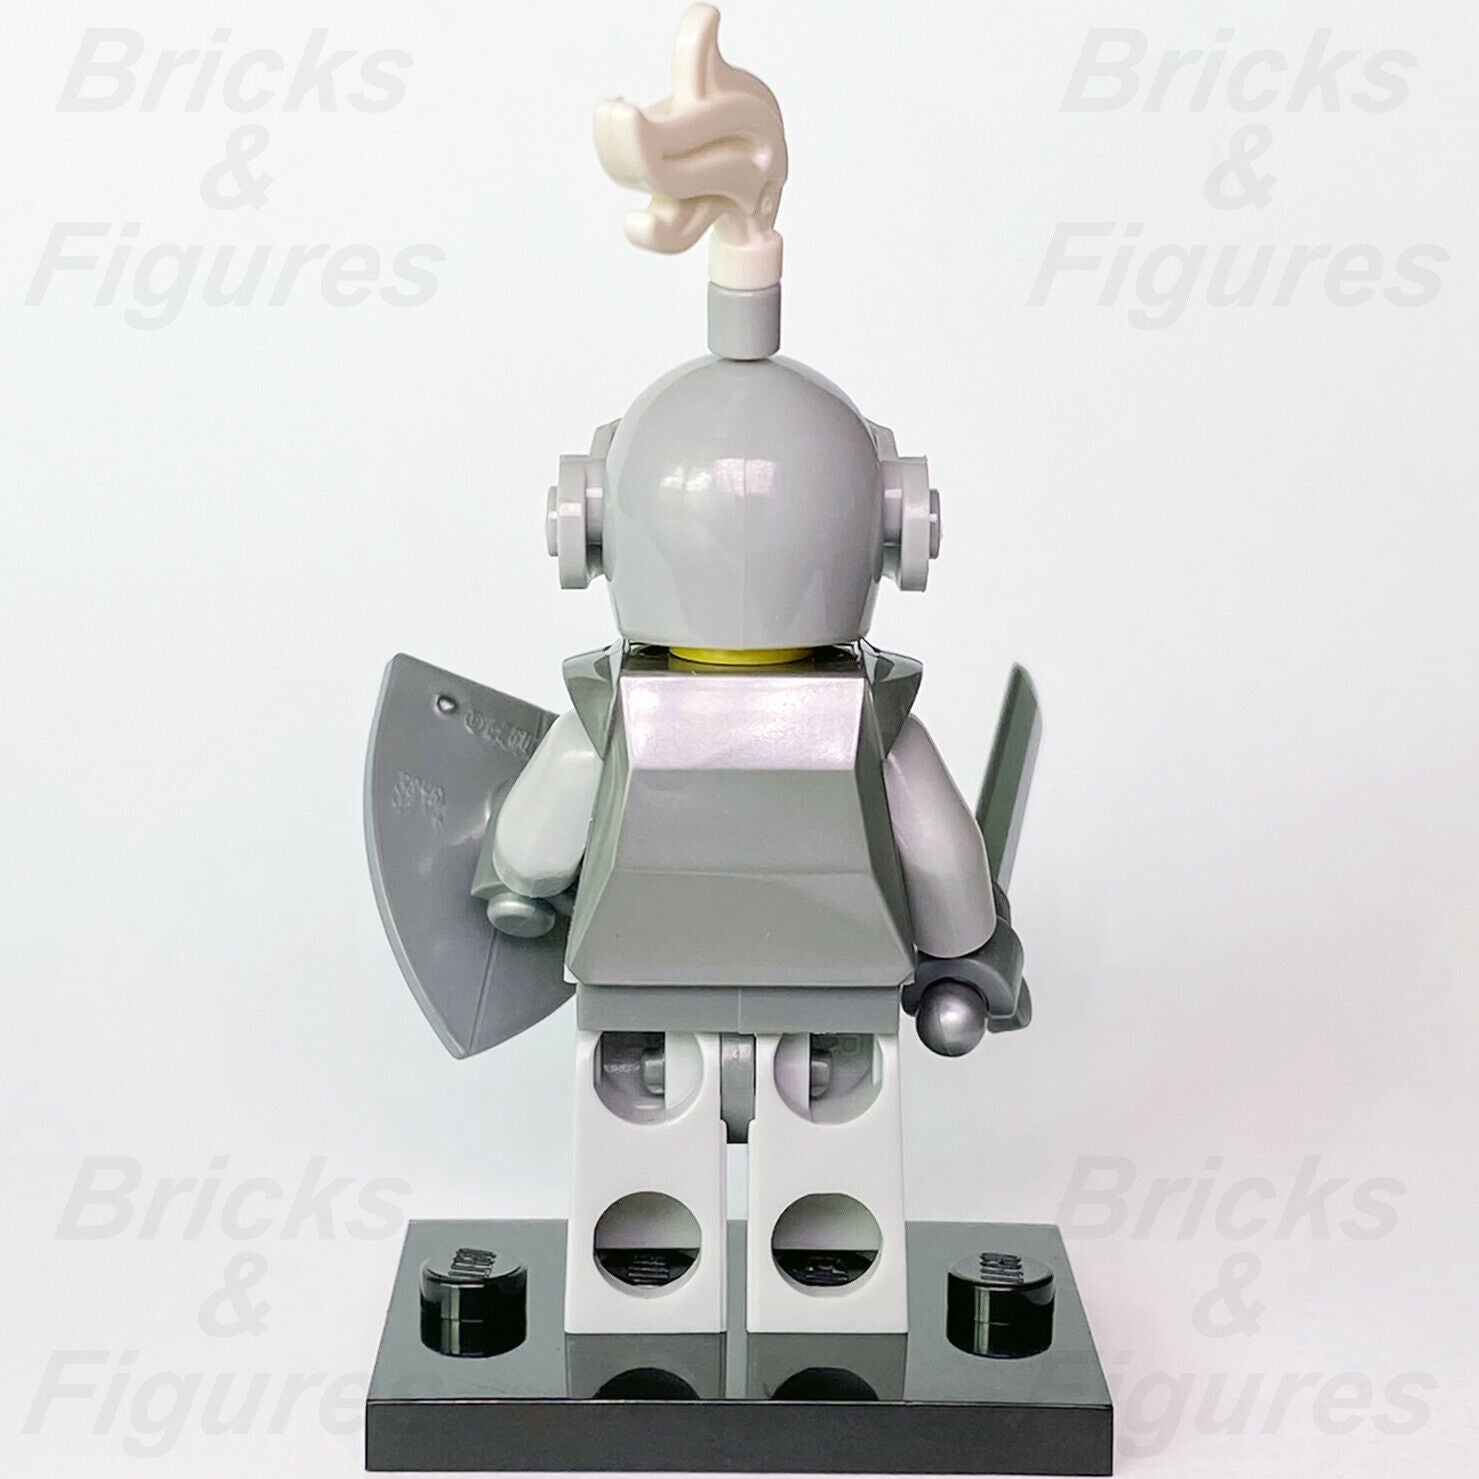 New Collectible Minifigures LEGO Heroic Knight Series 9 Minifig 71000 col09-4 - Bricks & Figures